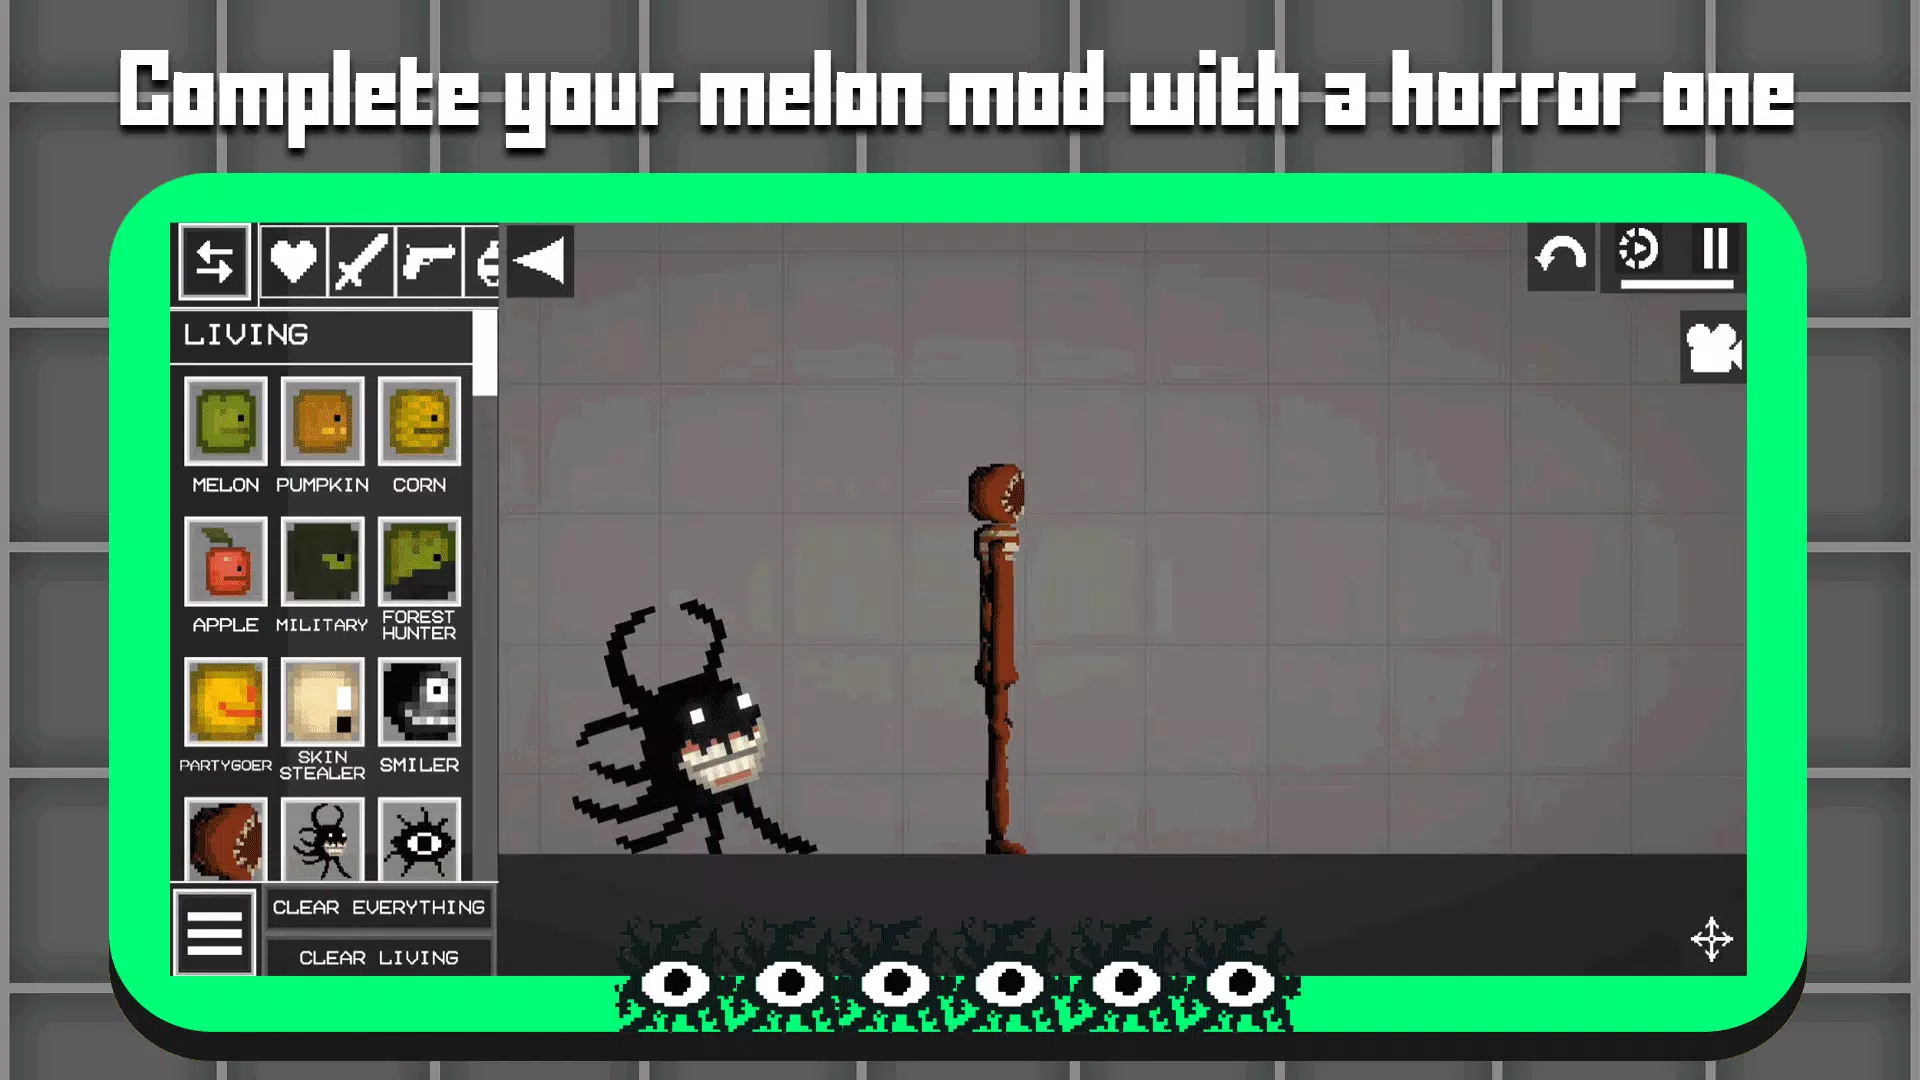 All Mod For Melon Playground APK for Android Download